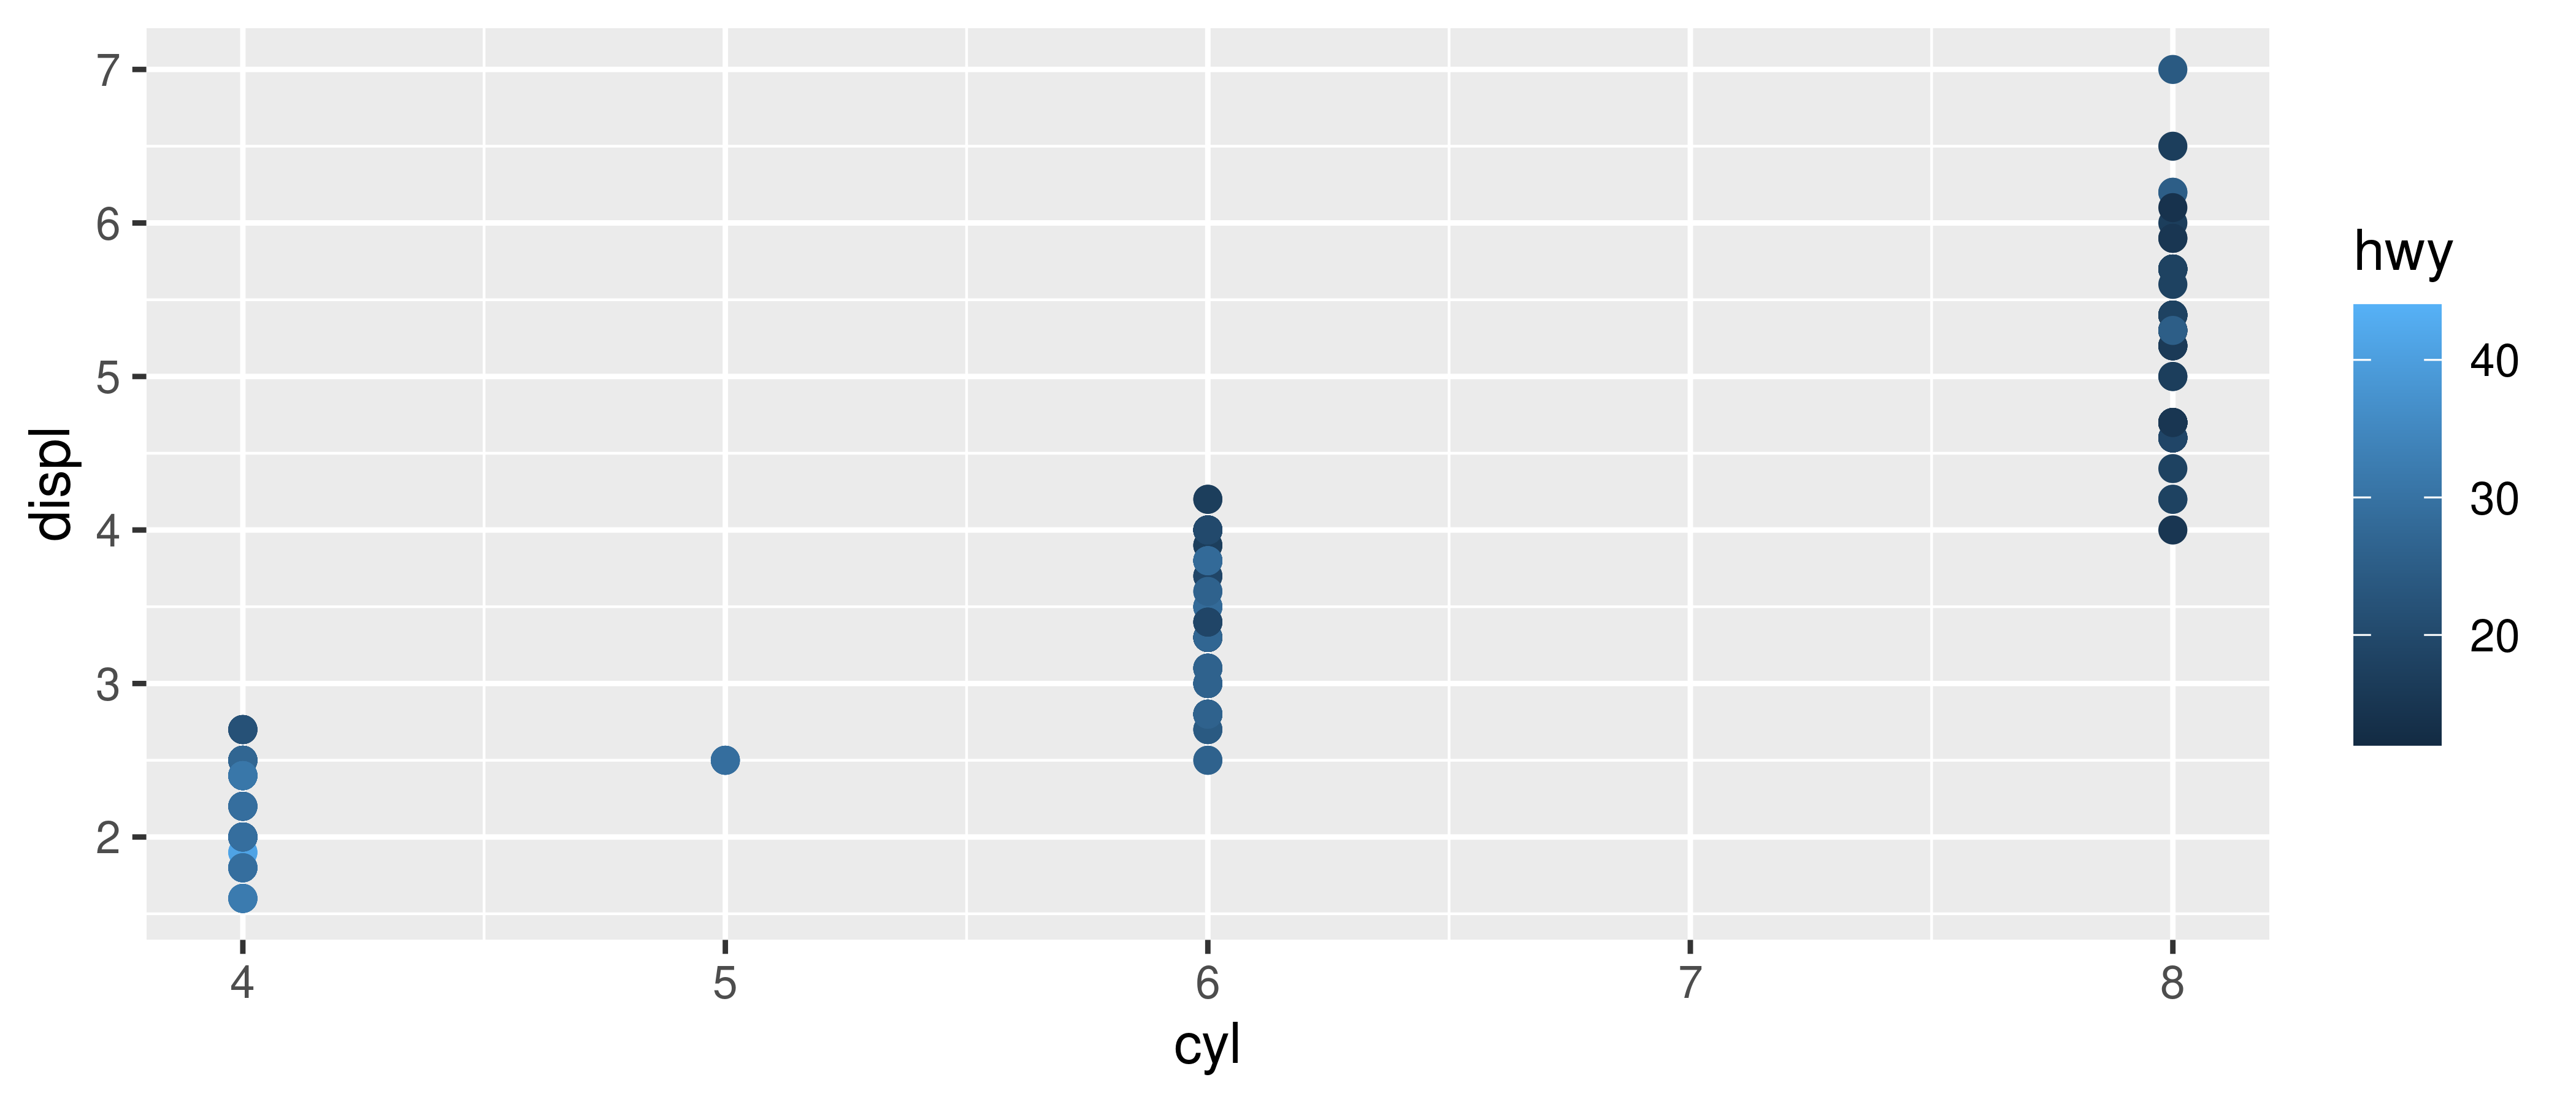 https://ggplot2-book.org/scales-colour_files/figure-html/unnamed-chunk-18-1.png